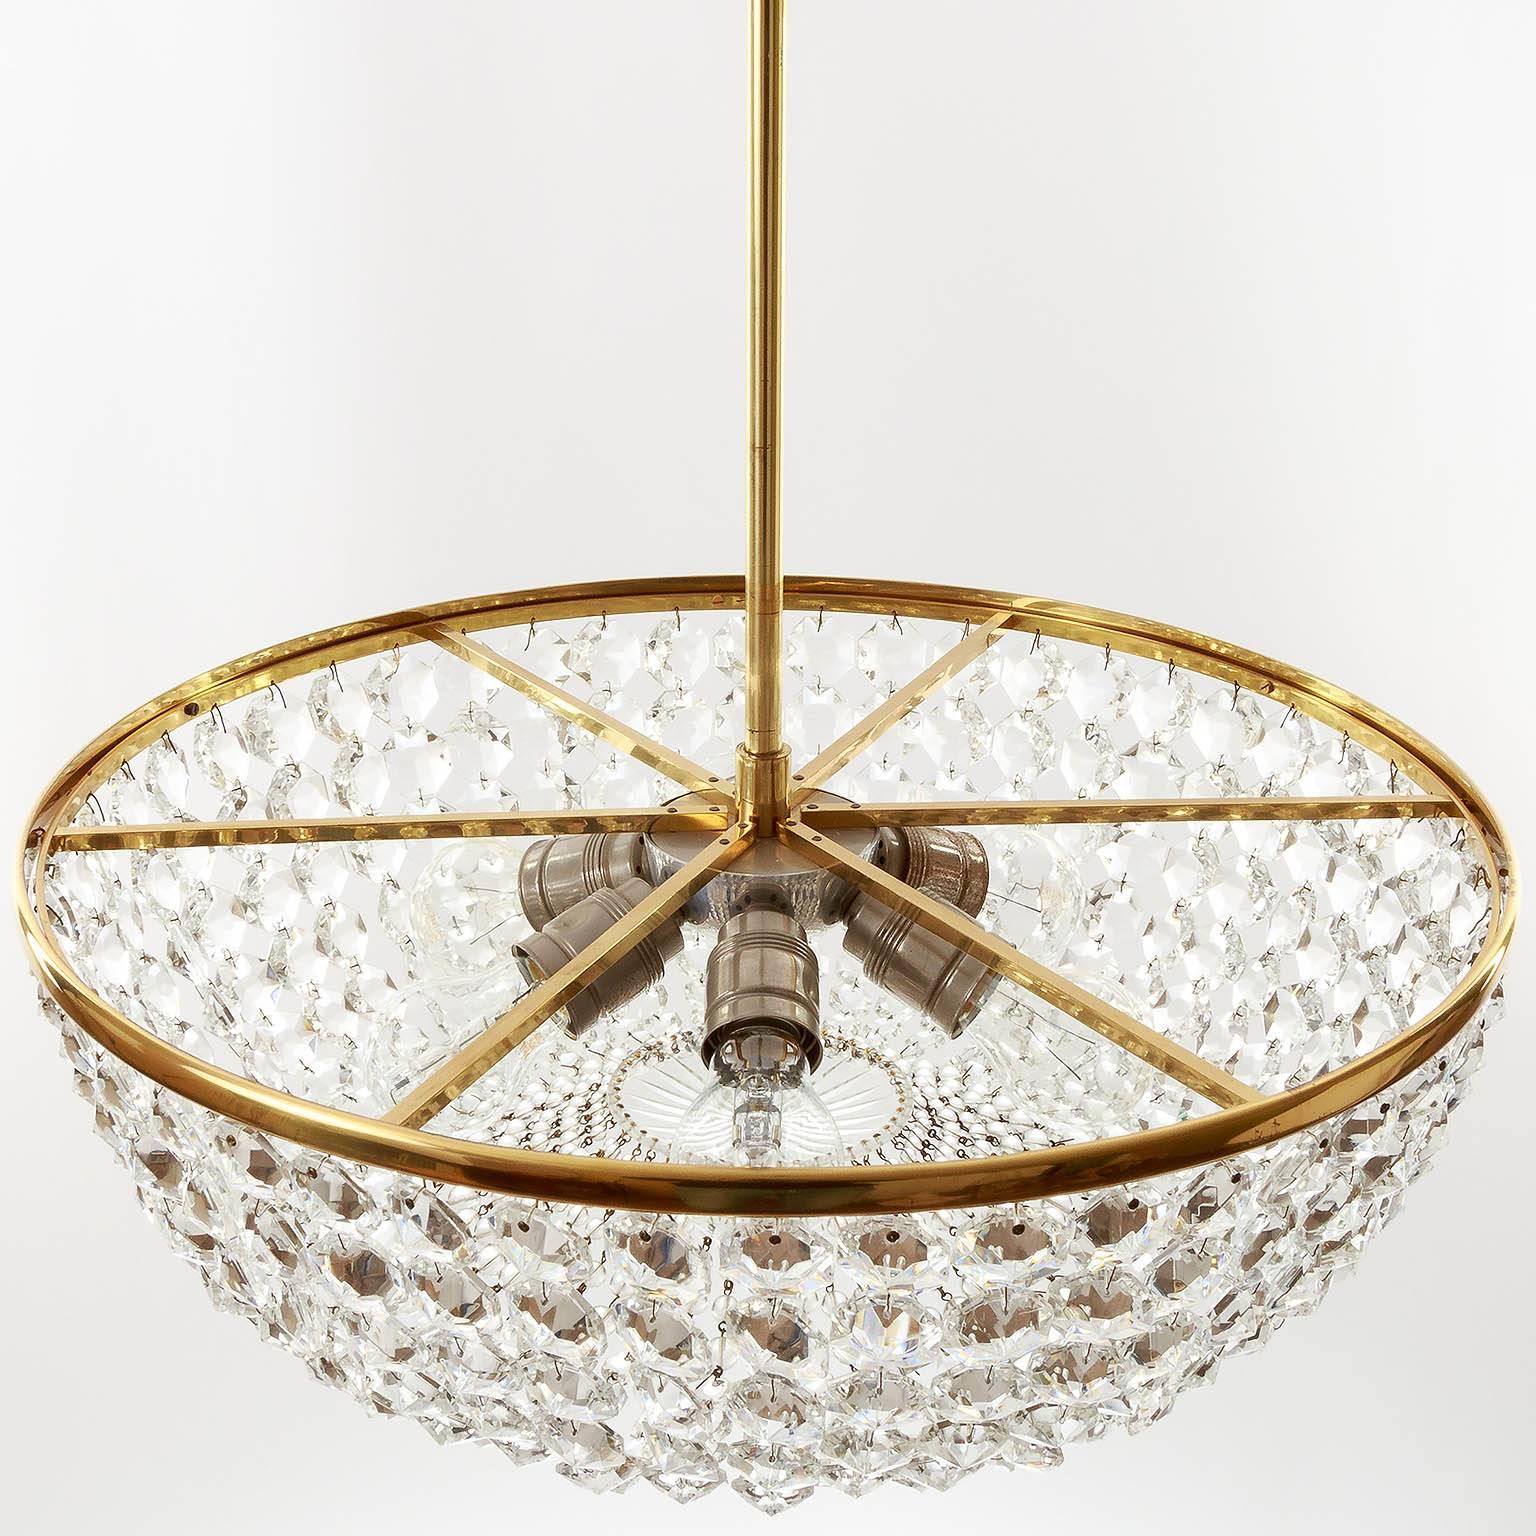 Mid-20th Century Viennese Coffee House Basket Crystal Chandelier by Lobmeyr, 1960s